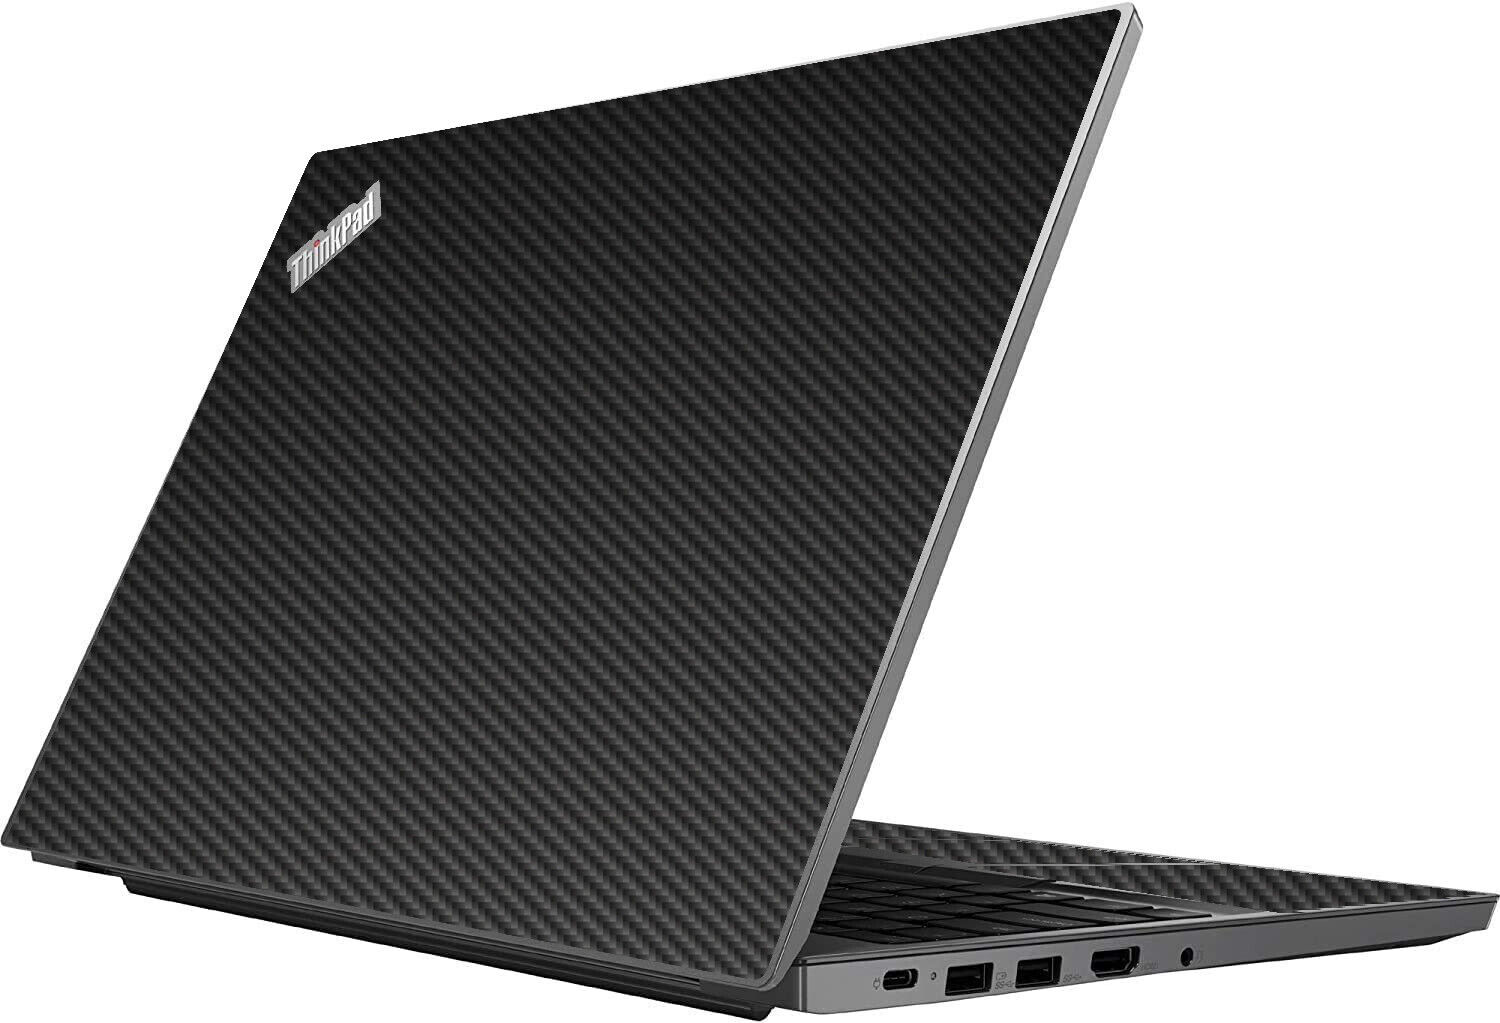 LidStyles Carbon Fiber Laptop Skin Protector Decal Lenovo ThinkPad T14S G1